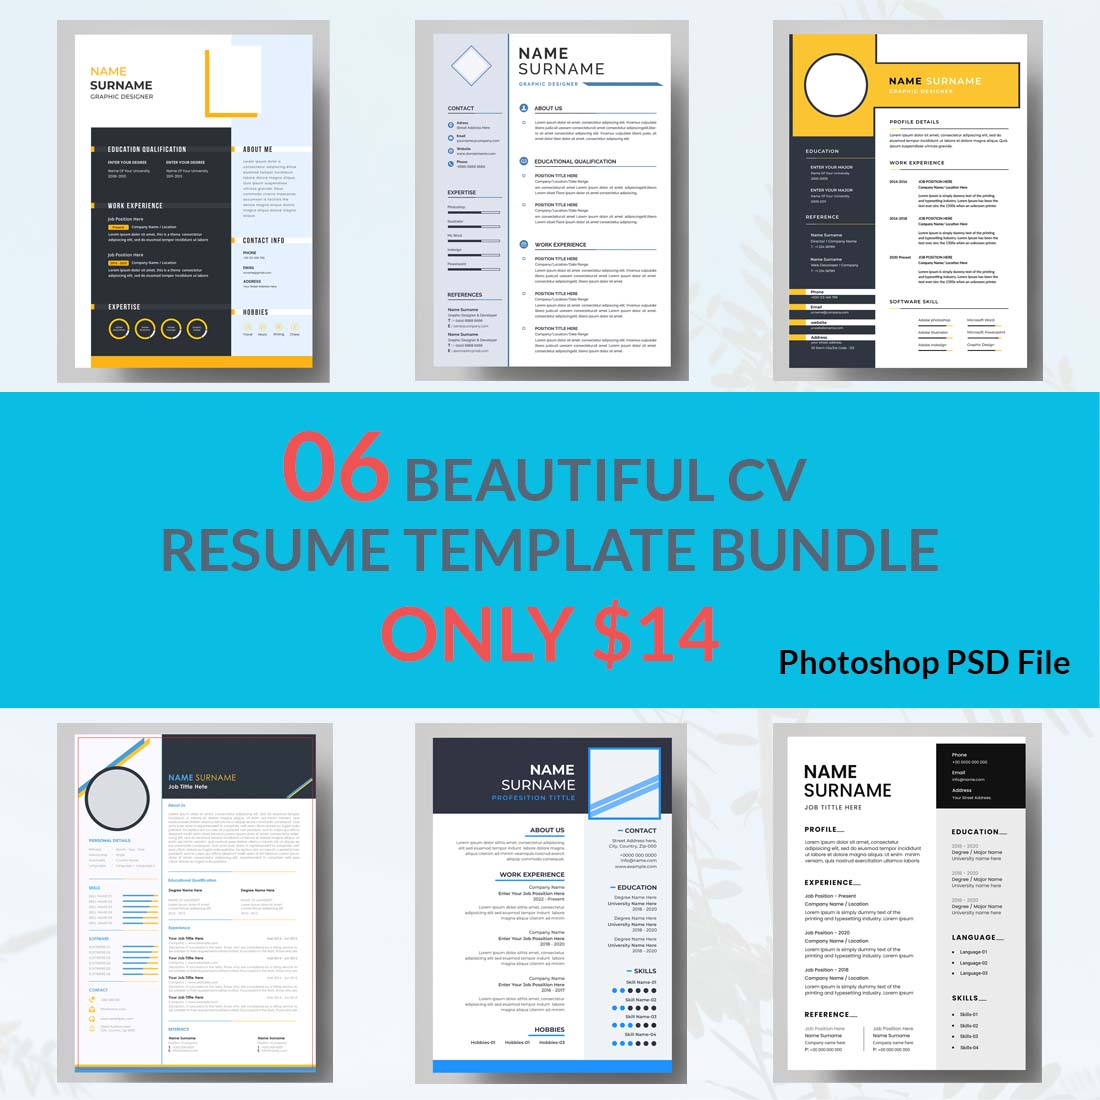 Bunch of different resume templates on a blue background.